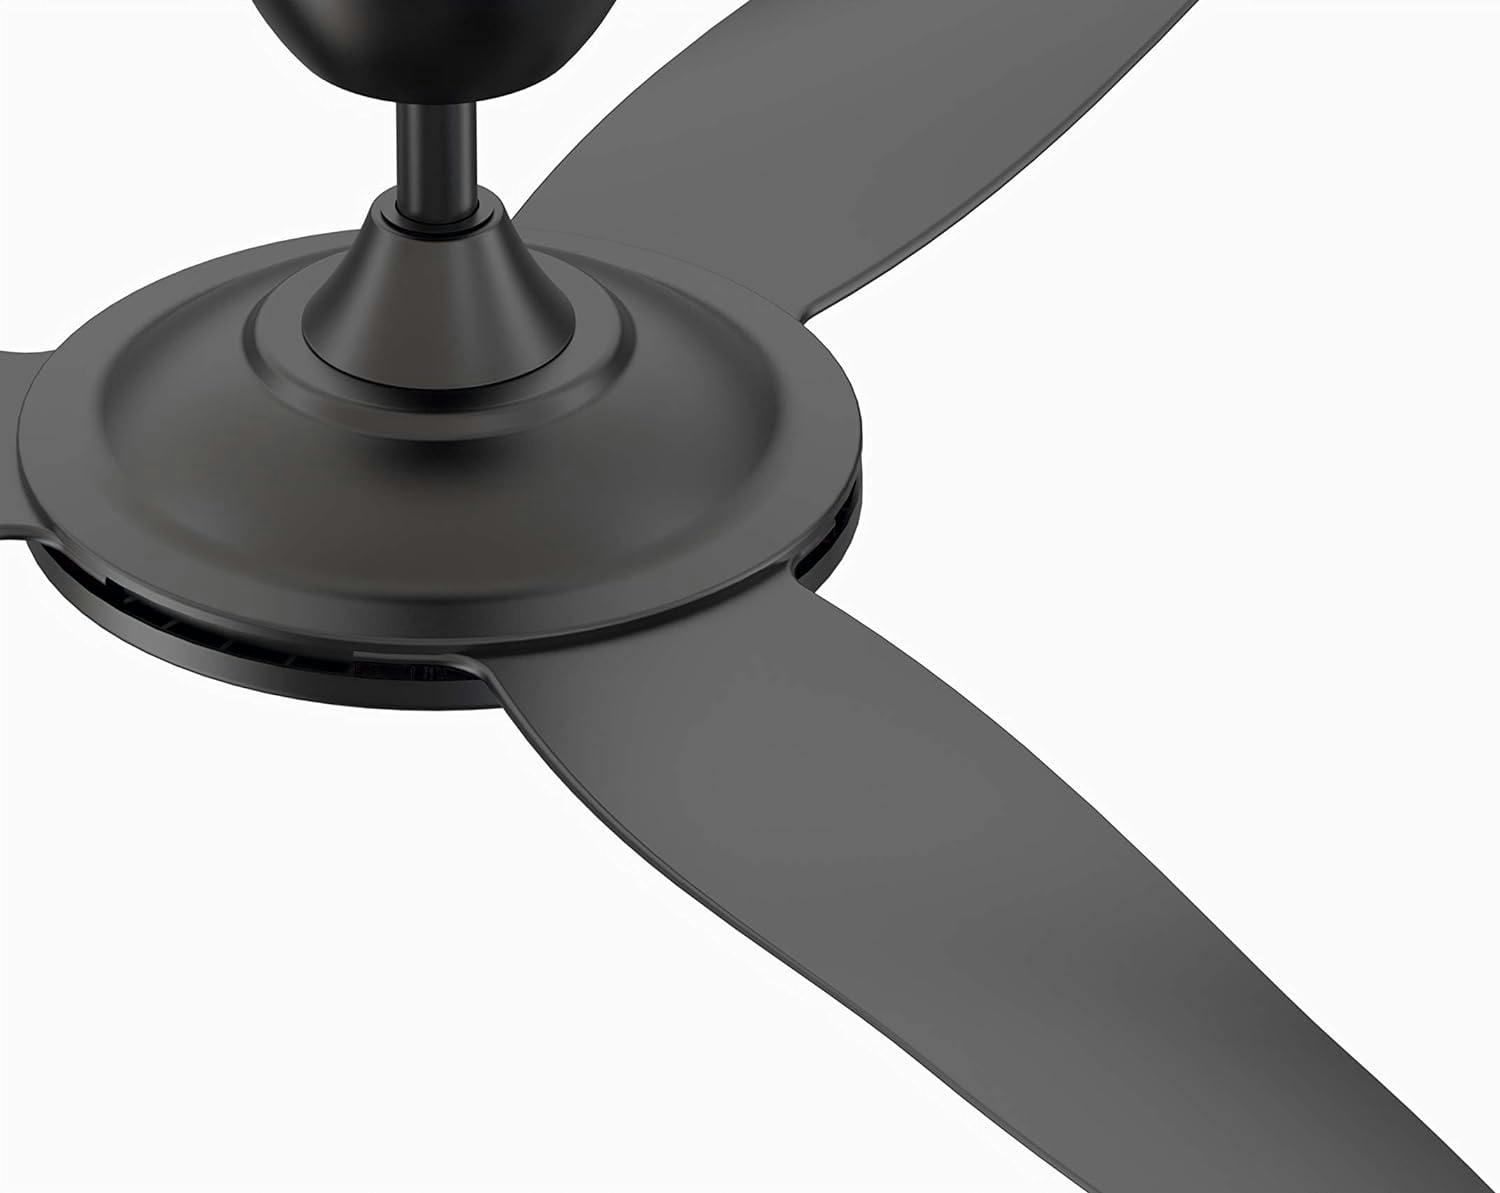 GlideAire 52" Smart Black Composite Blade Ceiling Fan with Remote